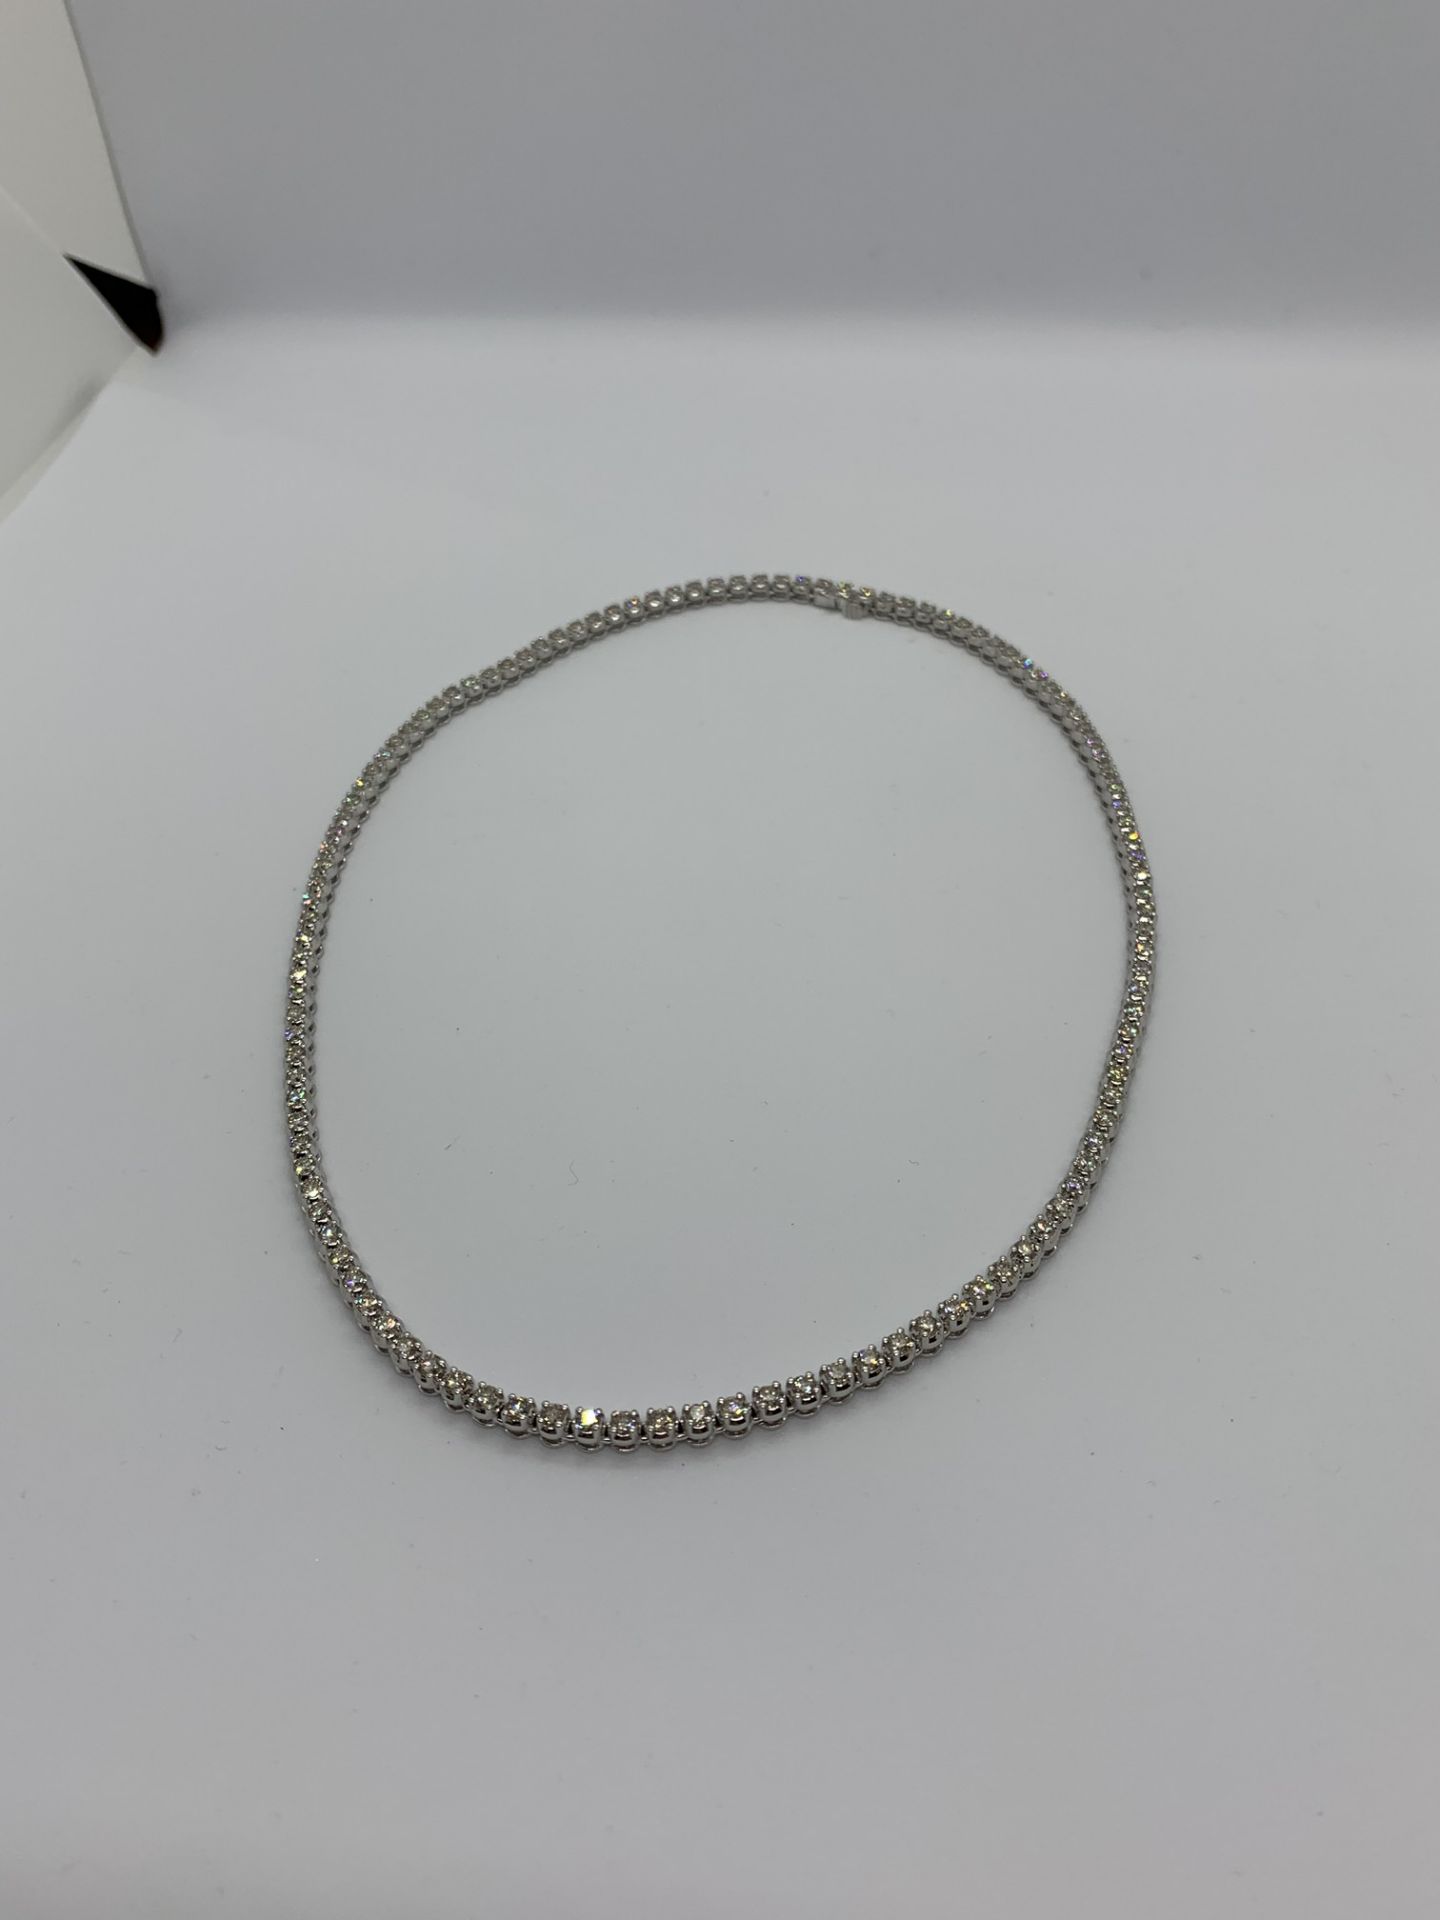 8.01ct DIAMOND NECKLACE SET IN WHITE GOLD - Image 4 of 4